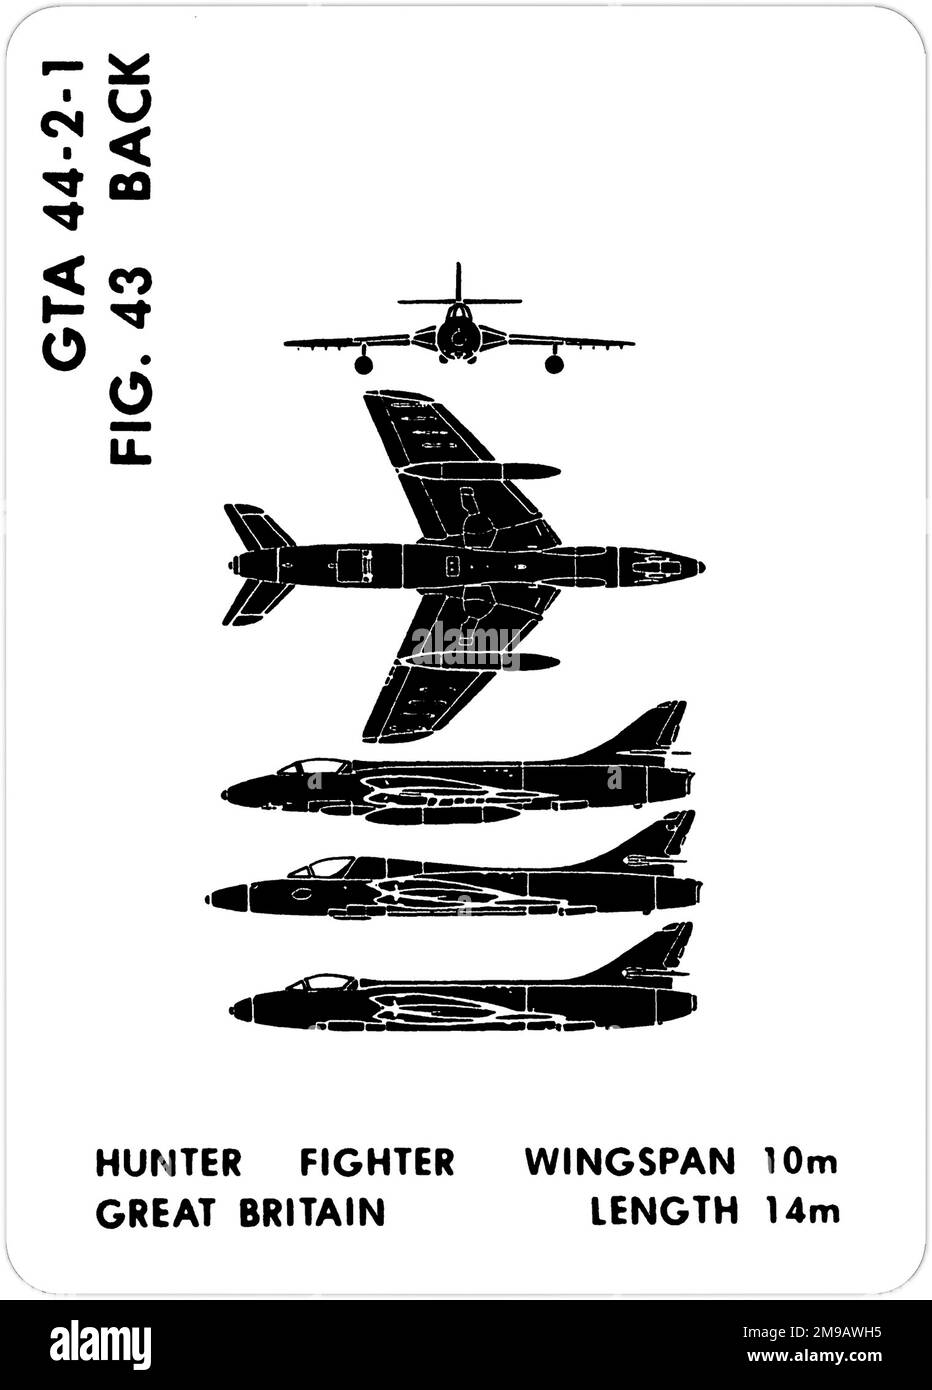 Hawker Hunter FGA.9 & T.7 - T.8 & F.6. This is one of the series of Graphics Training Aids (GTA) used by the United States Army to train their personnel to recognize friendly and hostile aircraft. This particular set, GTA 44-2-1, was issued in July1977. The set features aircraft from: Canada, Italy, United Kingdom, United States, and the USSR. Stock Photo